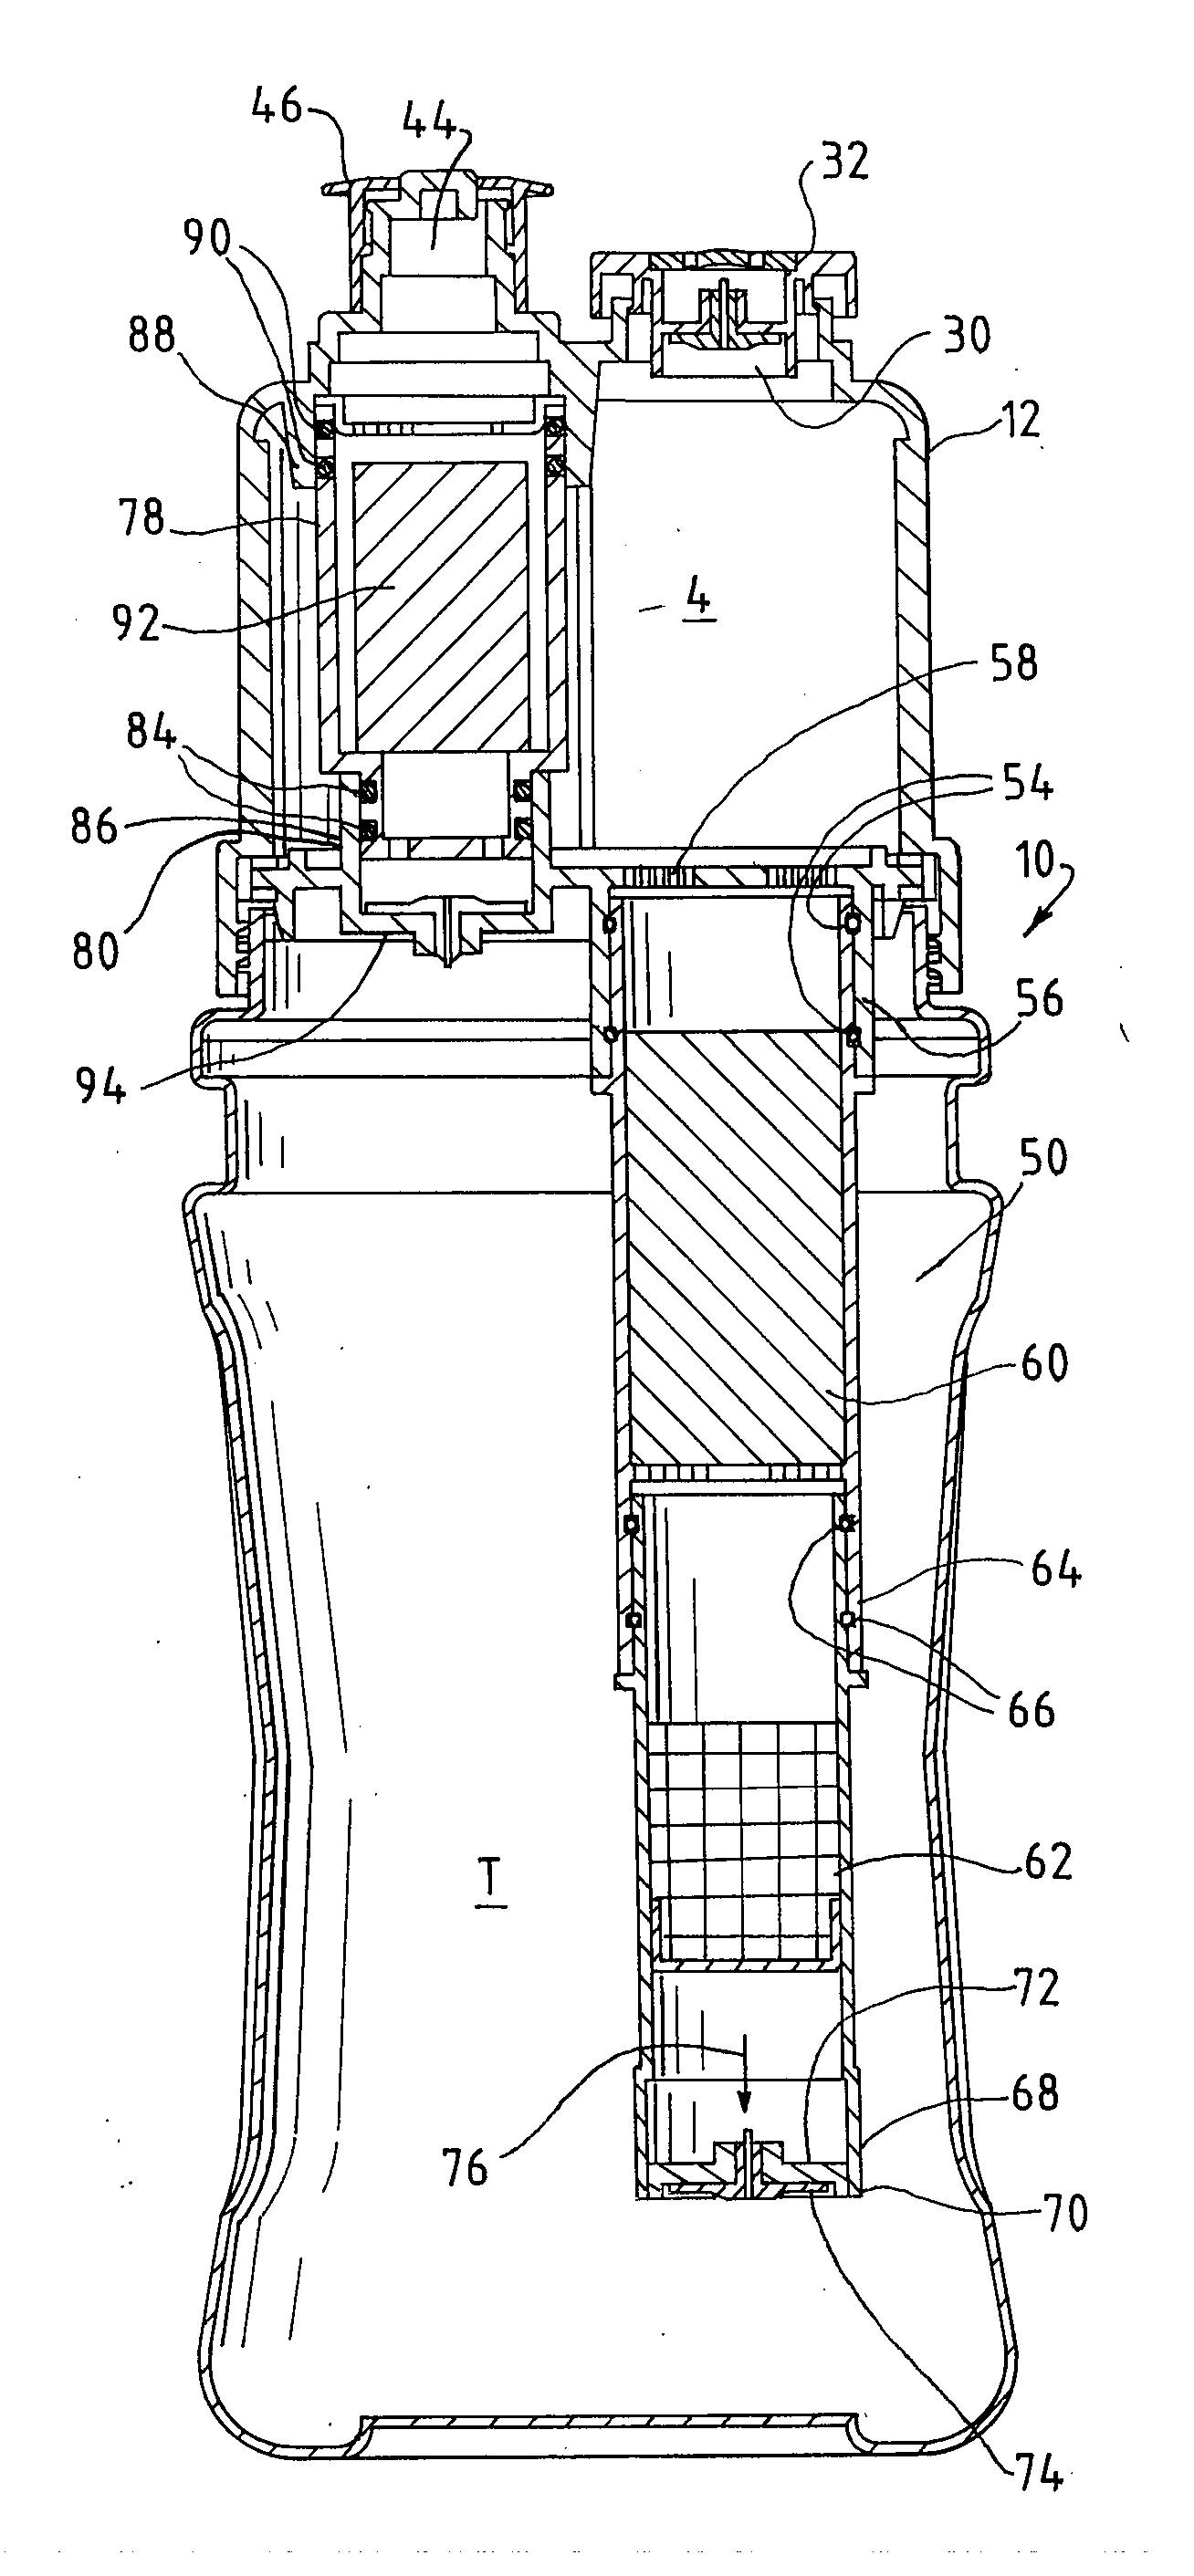 Multi-stage water purification device